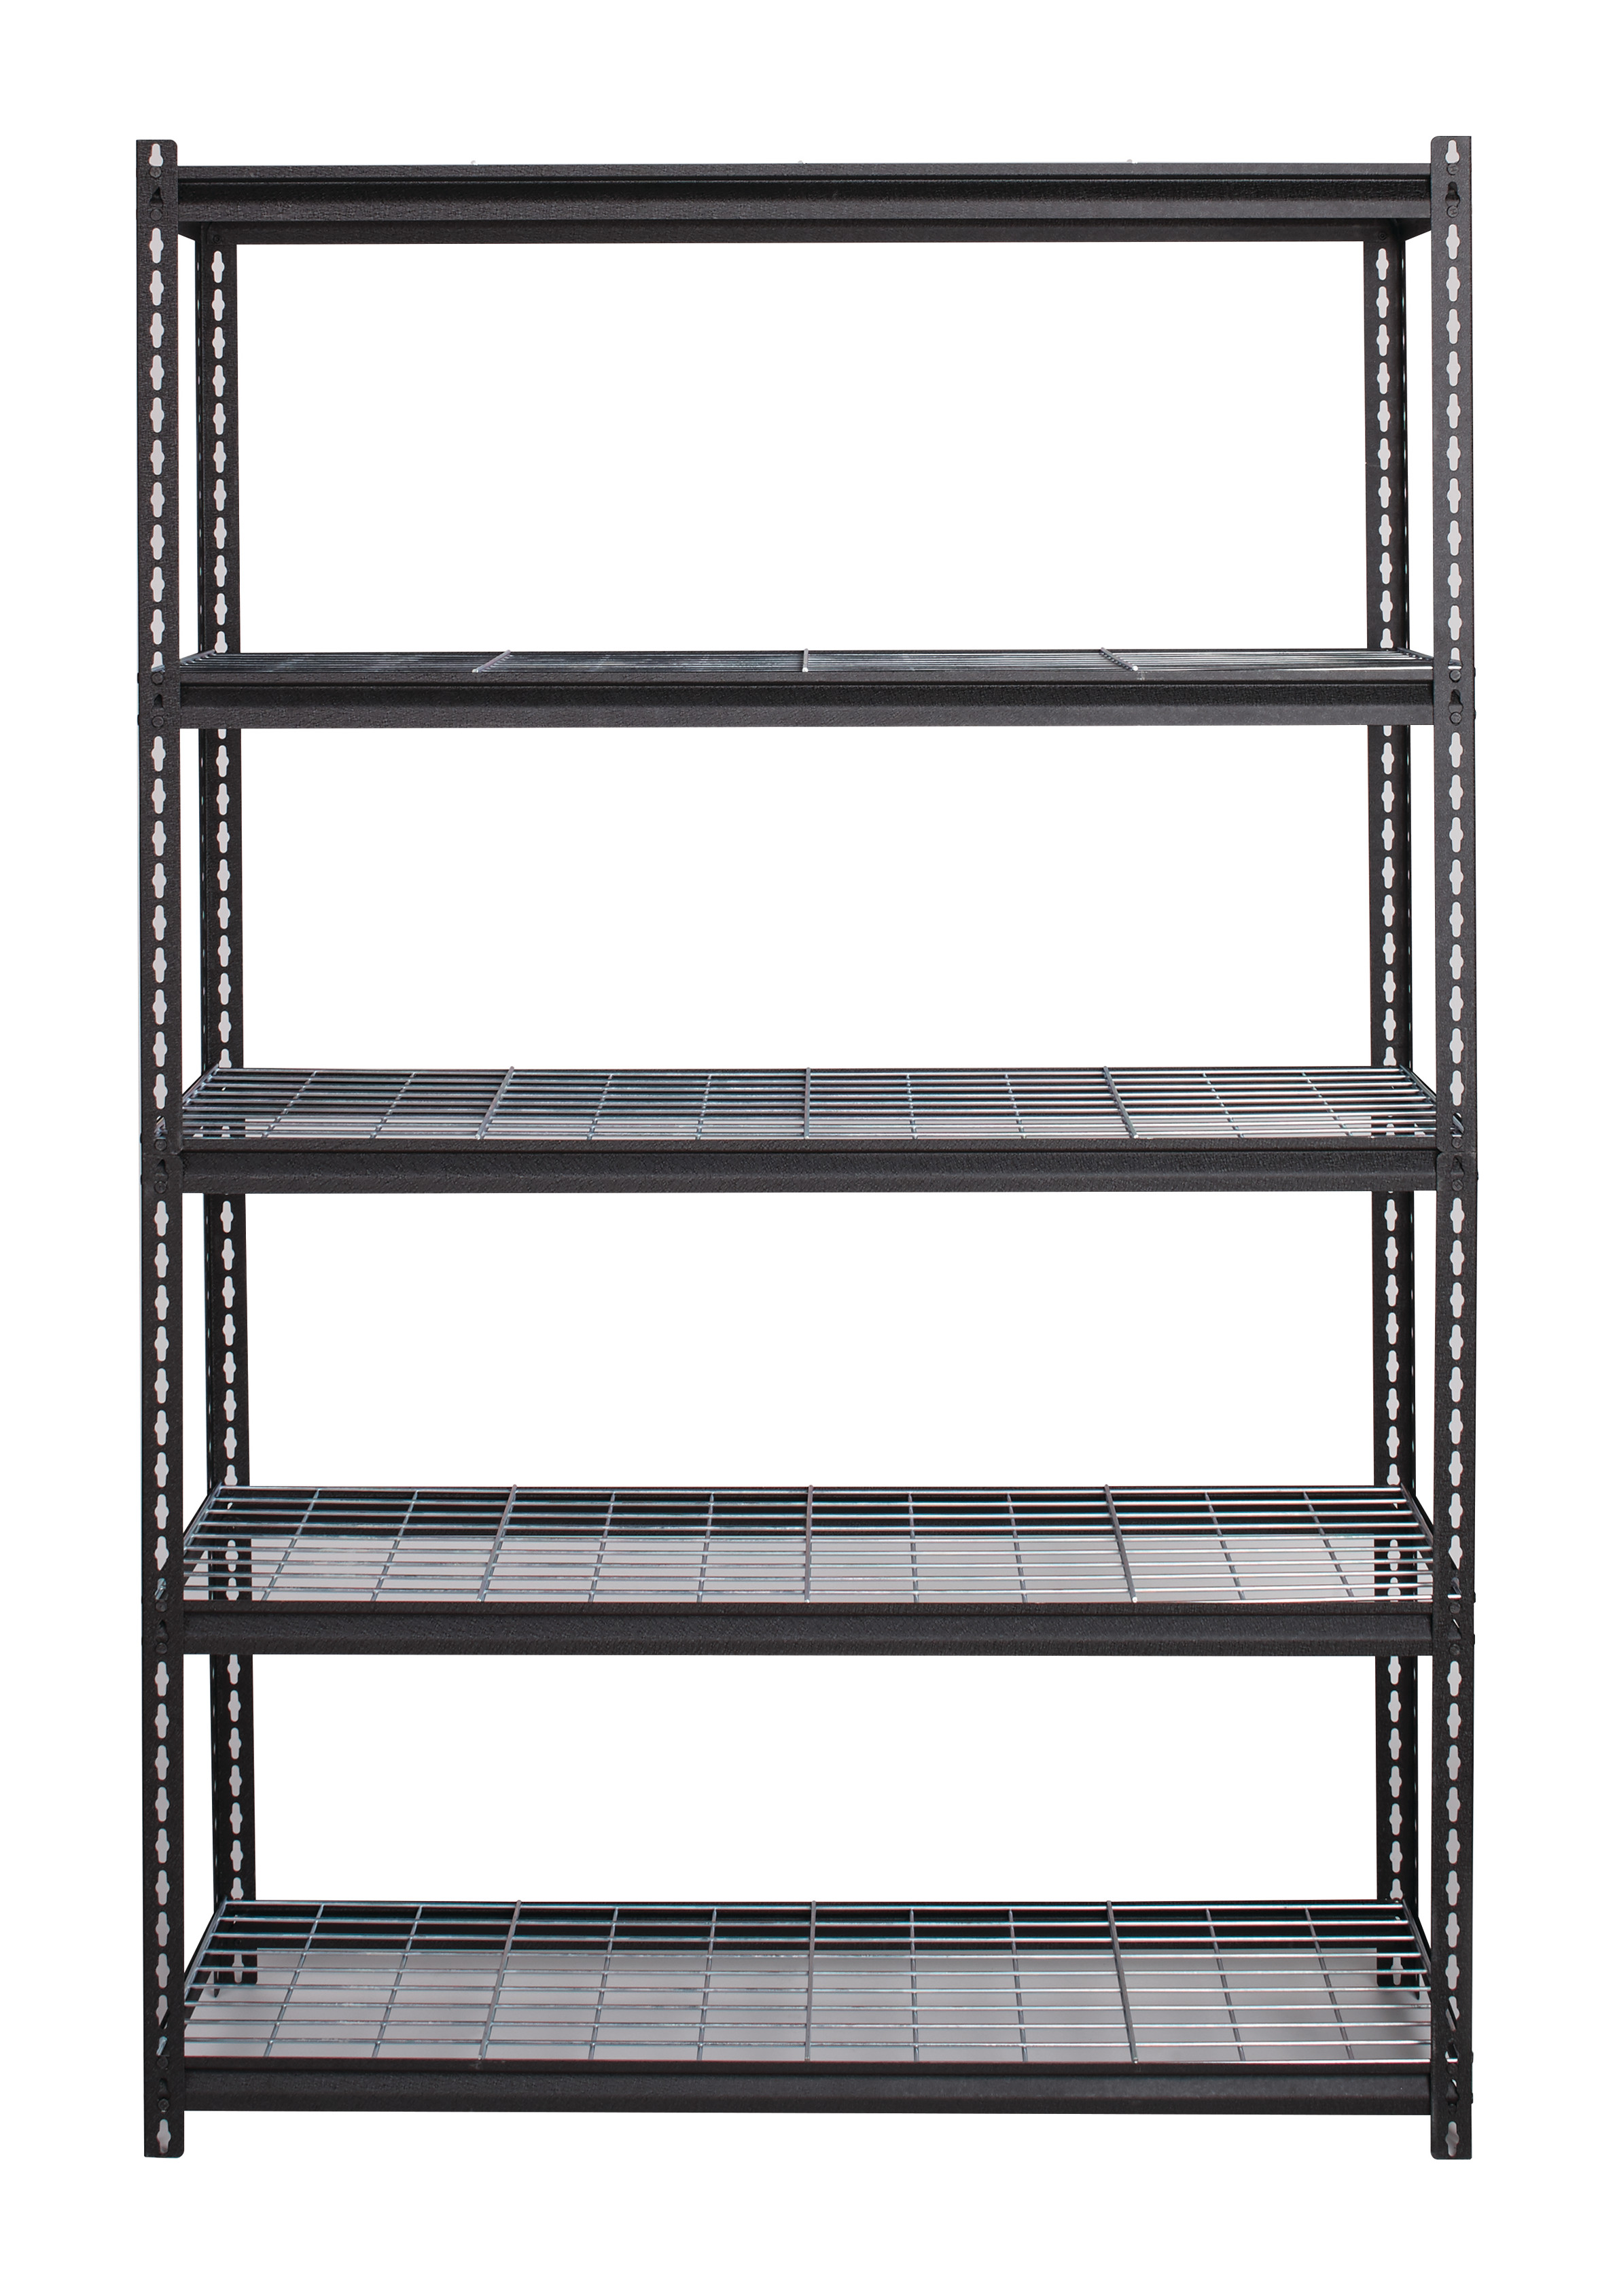 Iron Horse 2300 Riveted Wire Deck Shelving, 5-Shelf, 18Dx48Wx72H, Black - image 4 of 11